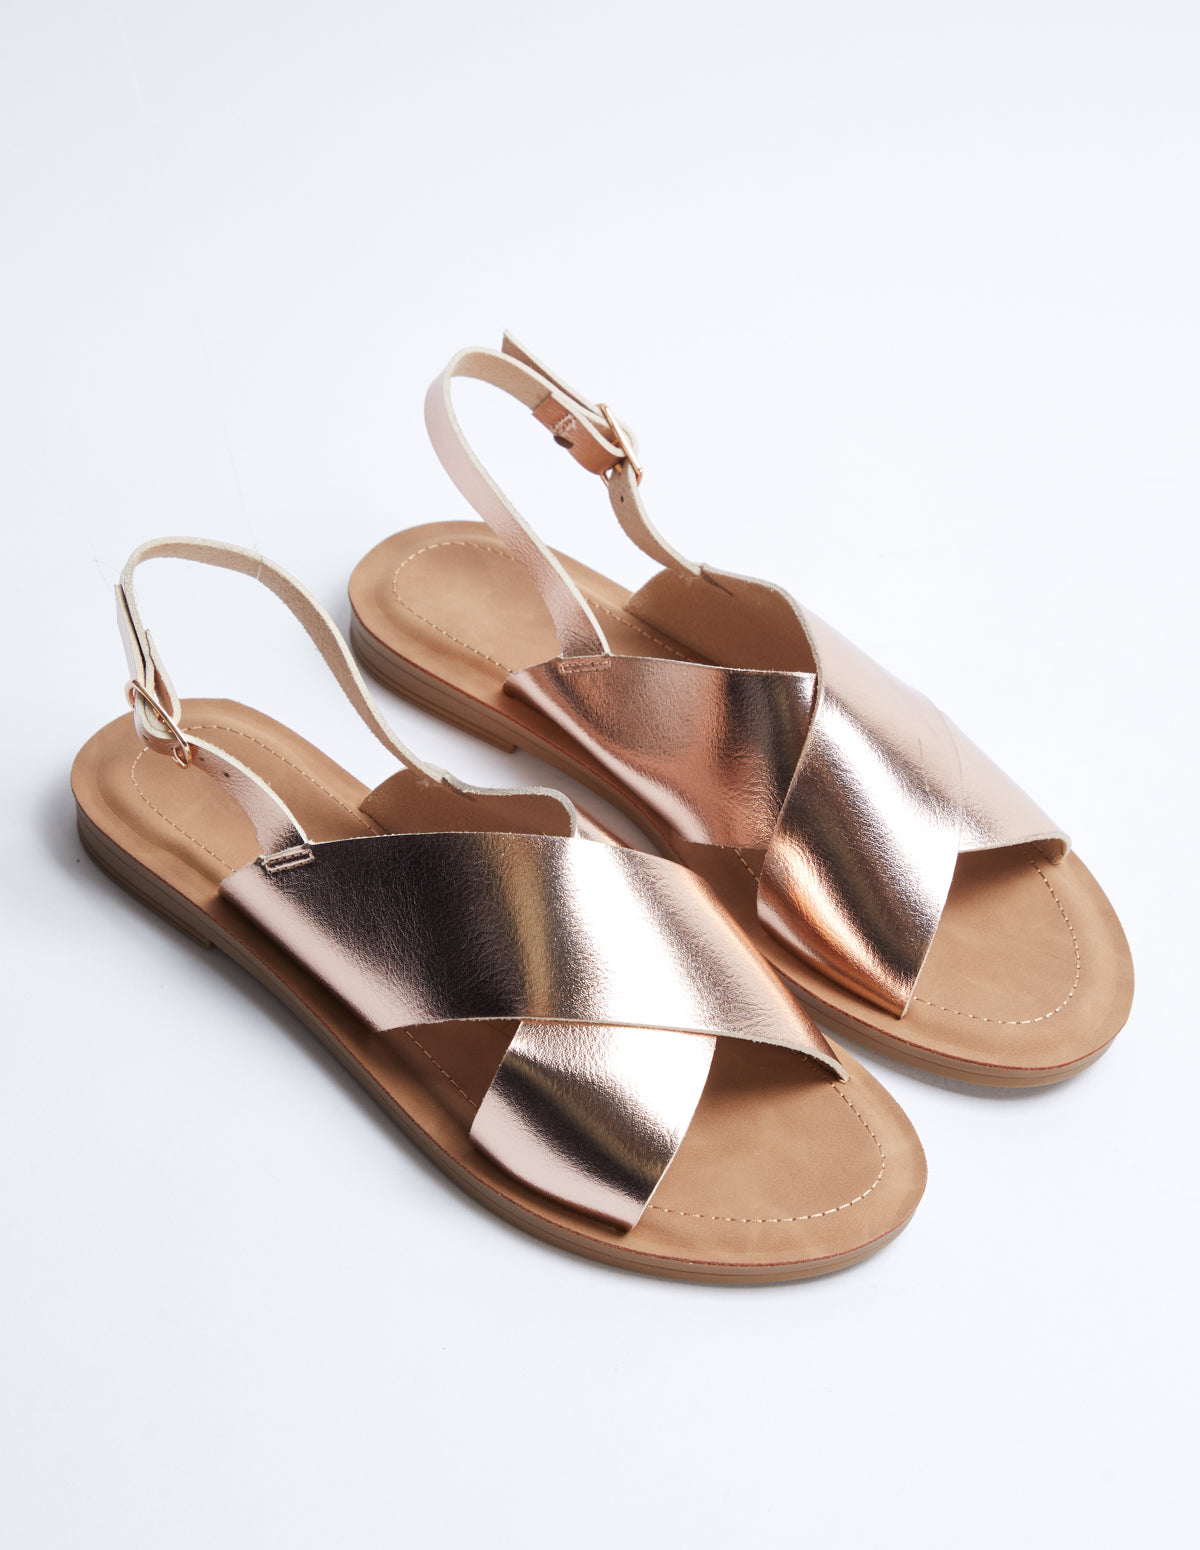 Crossover Strap Sandals - Apr